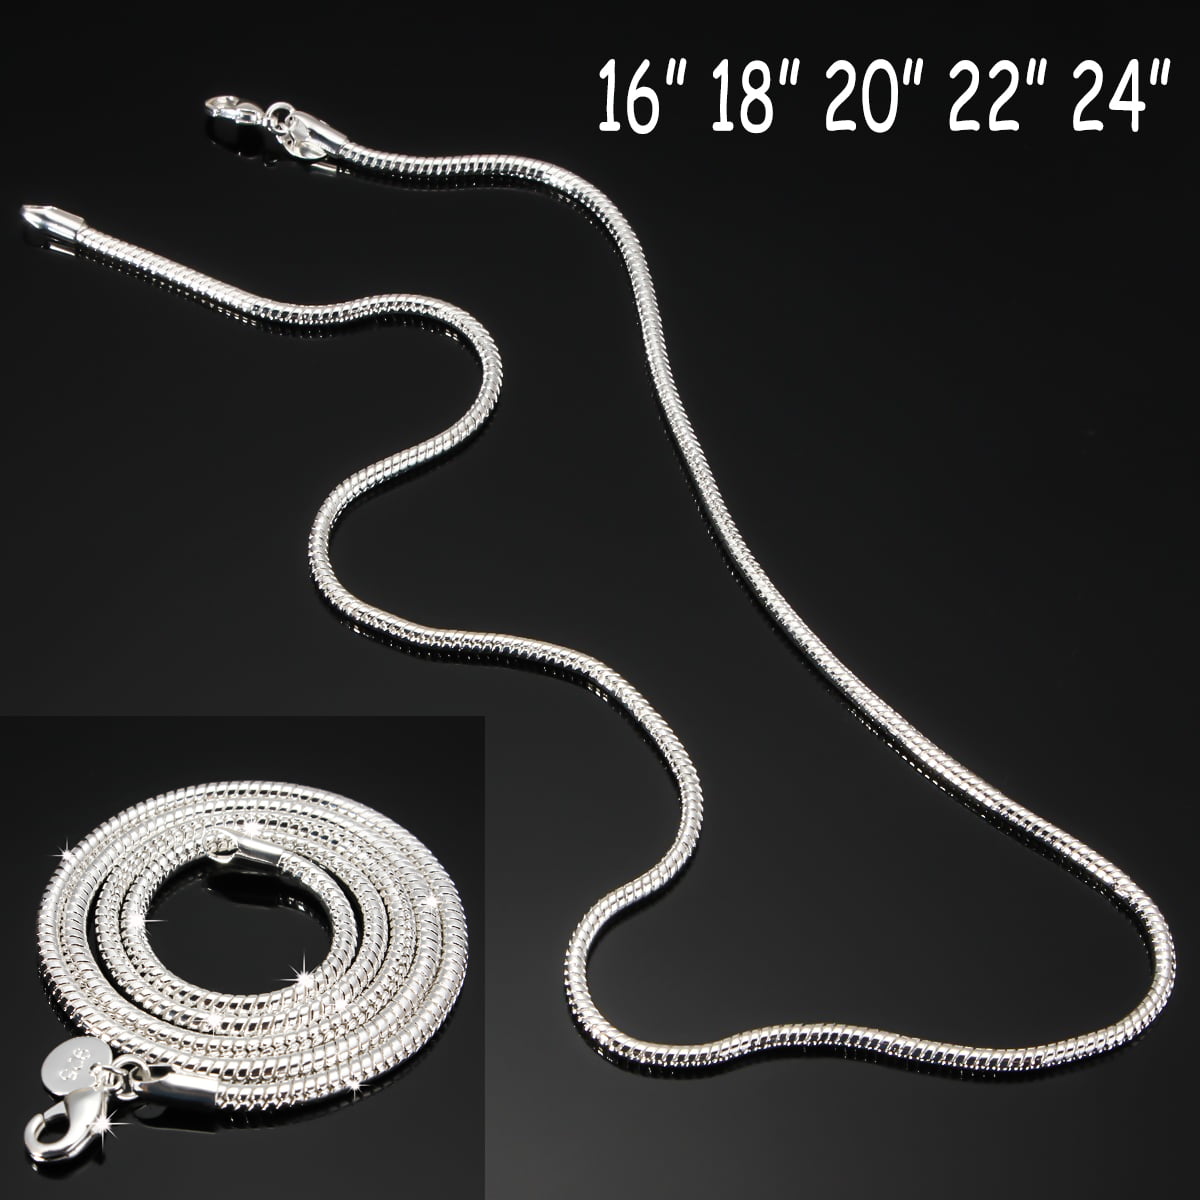 Double Accent 0.7mm Sterling Silver Italian Chain Necklace Round Snake Chain 16, 18, 20, 22, 24, 30 Inch 